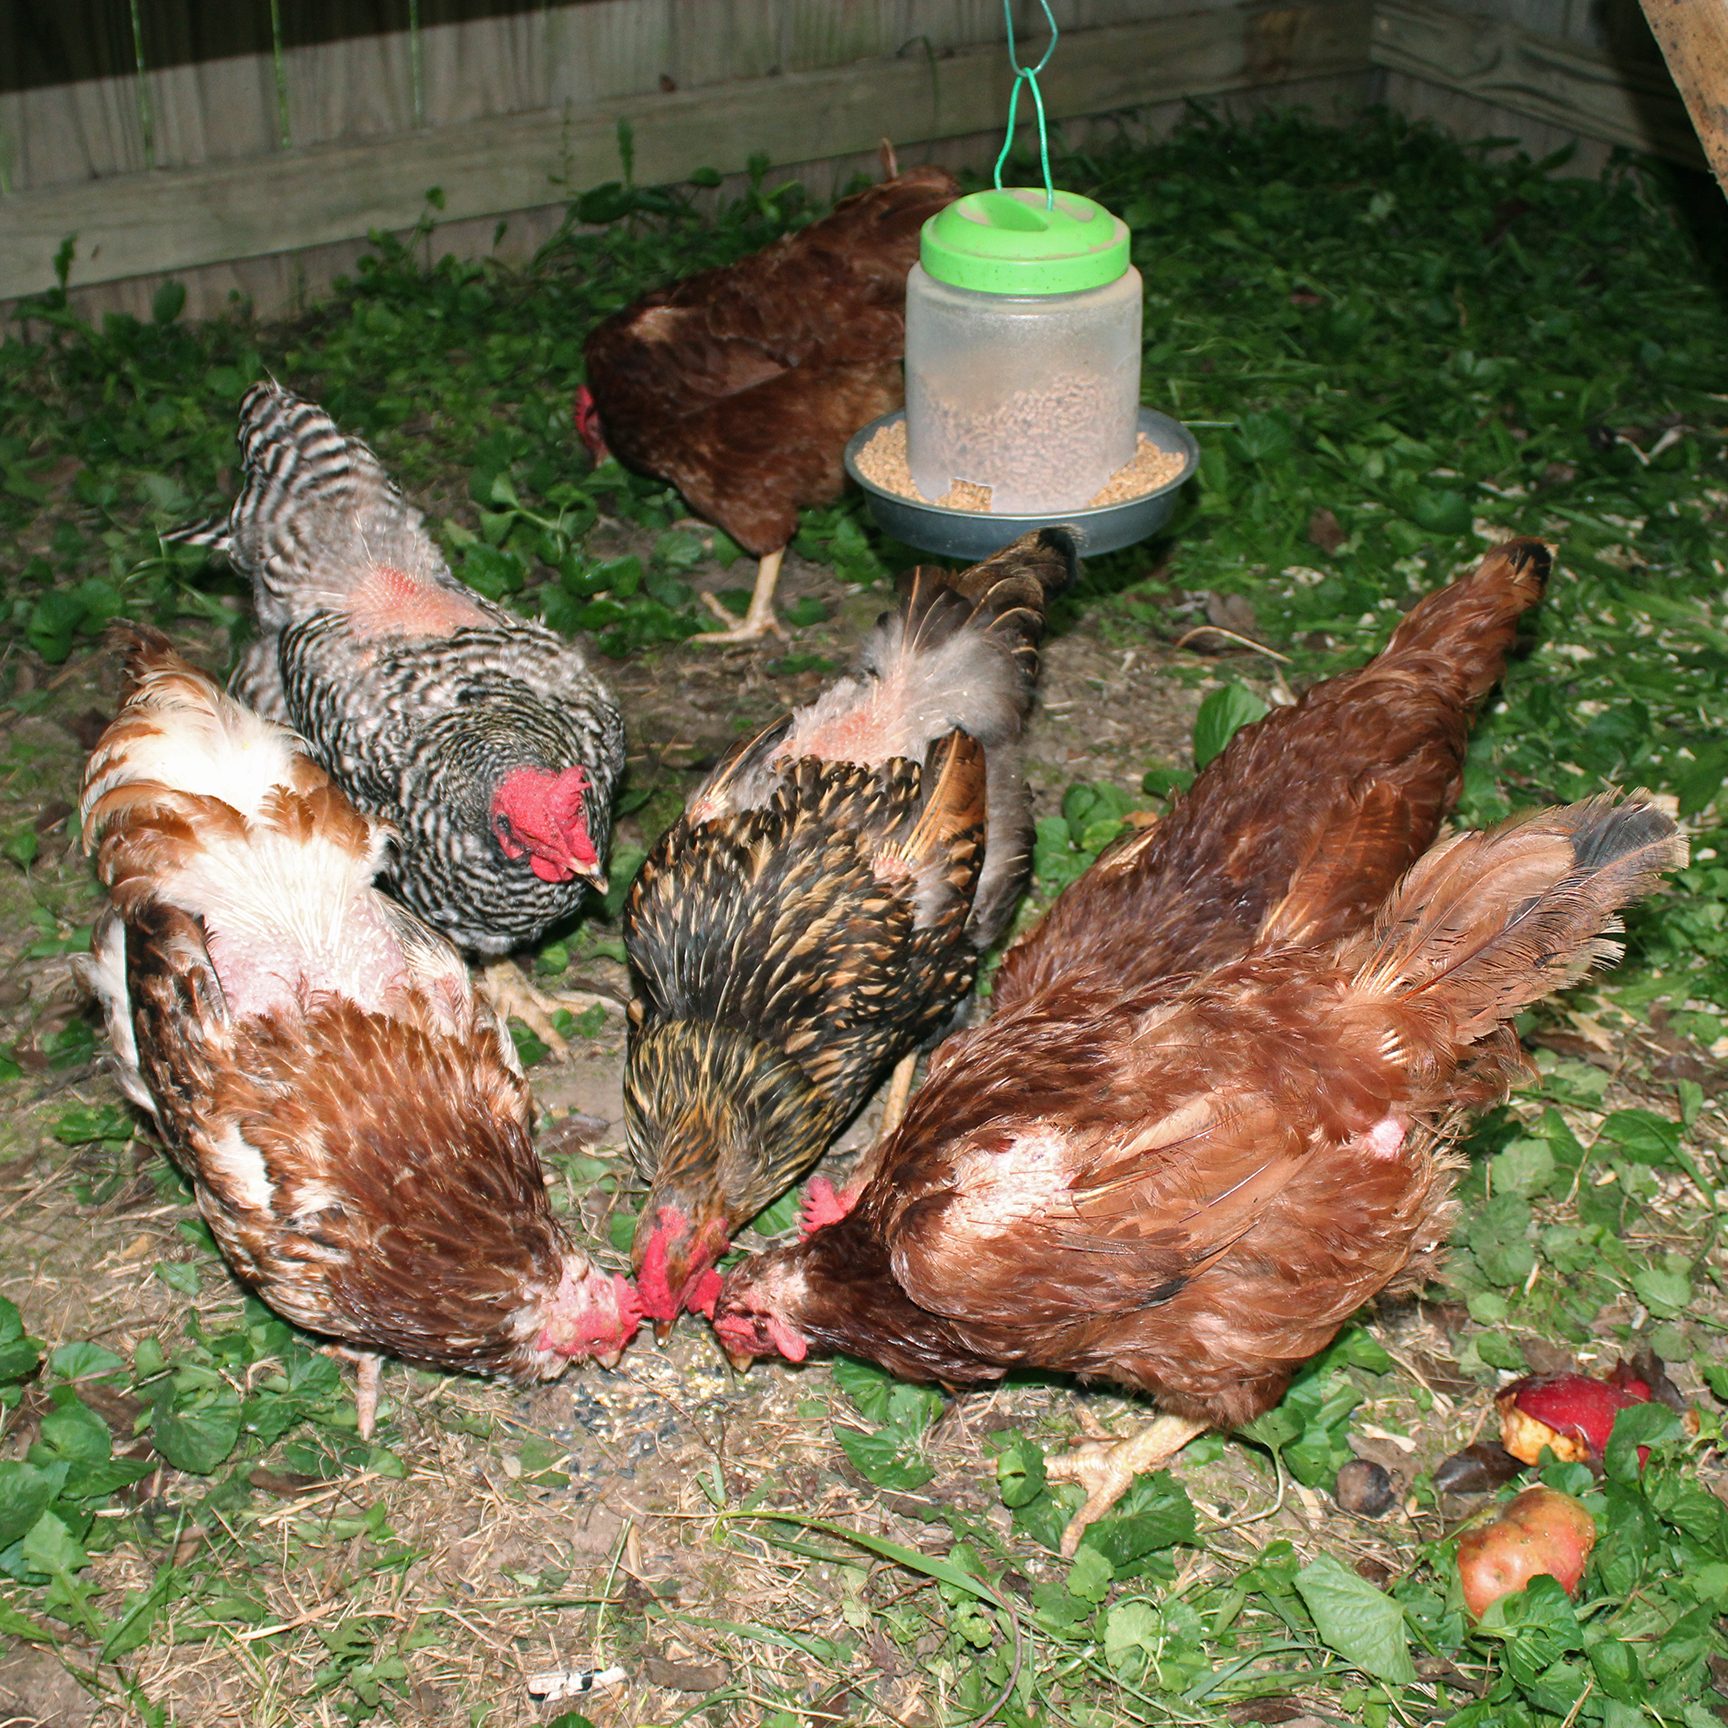 Adopted September 5 - re-homed because rooster was 'abusing' them :( No roos in this coop :)
(left to right) Betty the Faverolle, Dorothy the Barred Rock, Sheda the RIR (in back), Lacey the Golden Laced Wyandotte, Anna the RIR, and Cincinatti the Buckeye!

Can't wait for their feathers to grow back and see them in all their glory :)